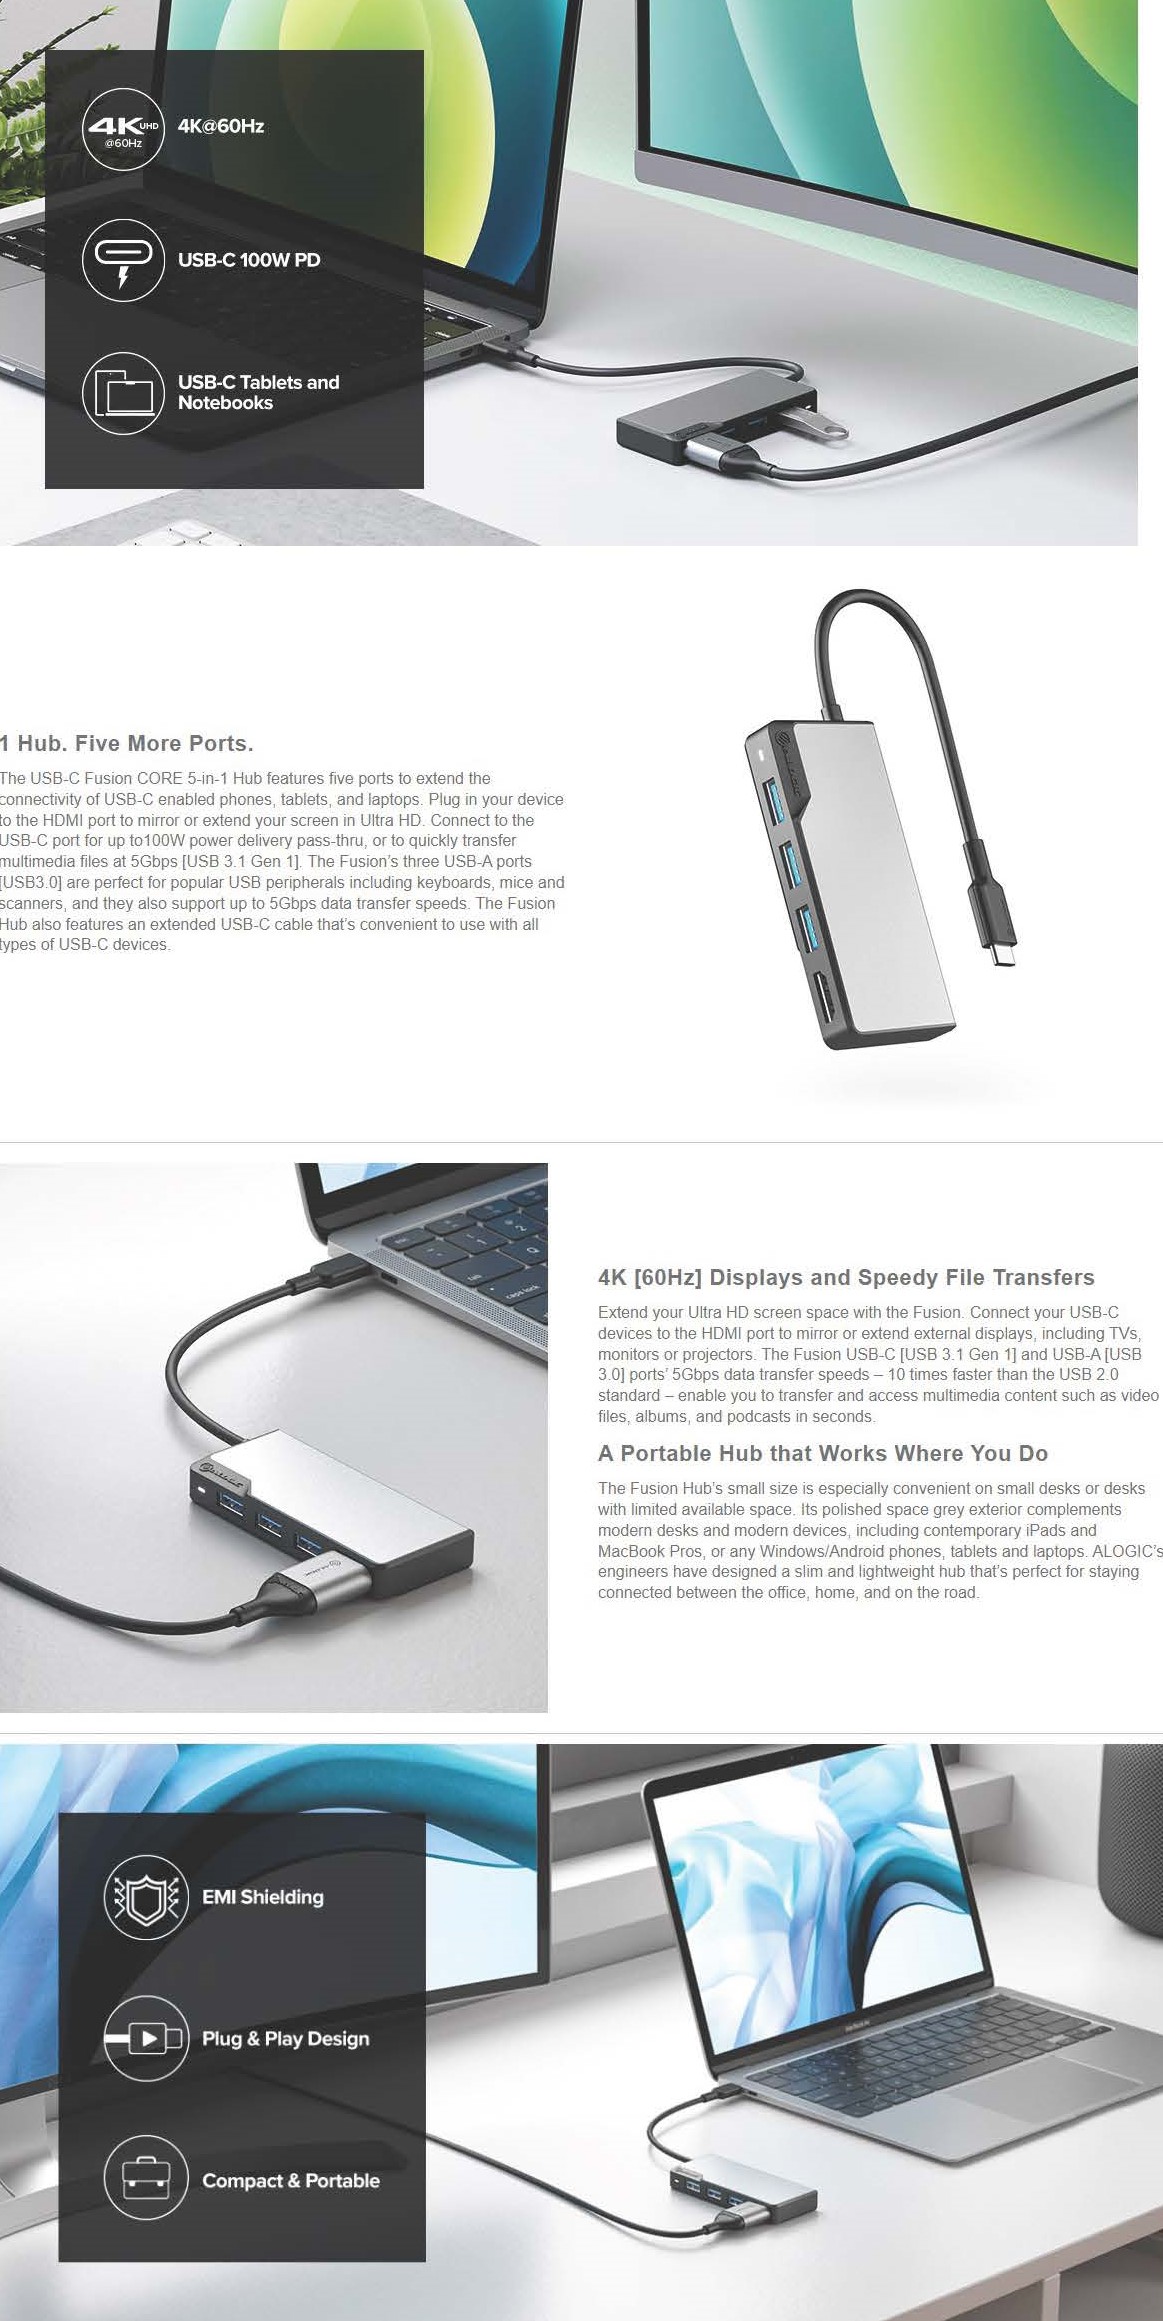 A large marketing image providing additional information about the product ALOGIC USB-C Fusion CORE 5-in-1 Hub V2 - Additional alt info not provided